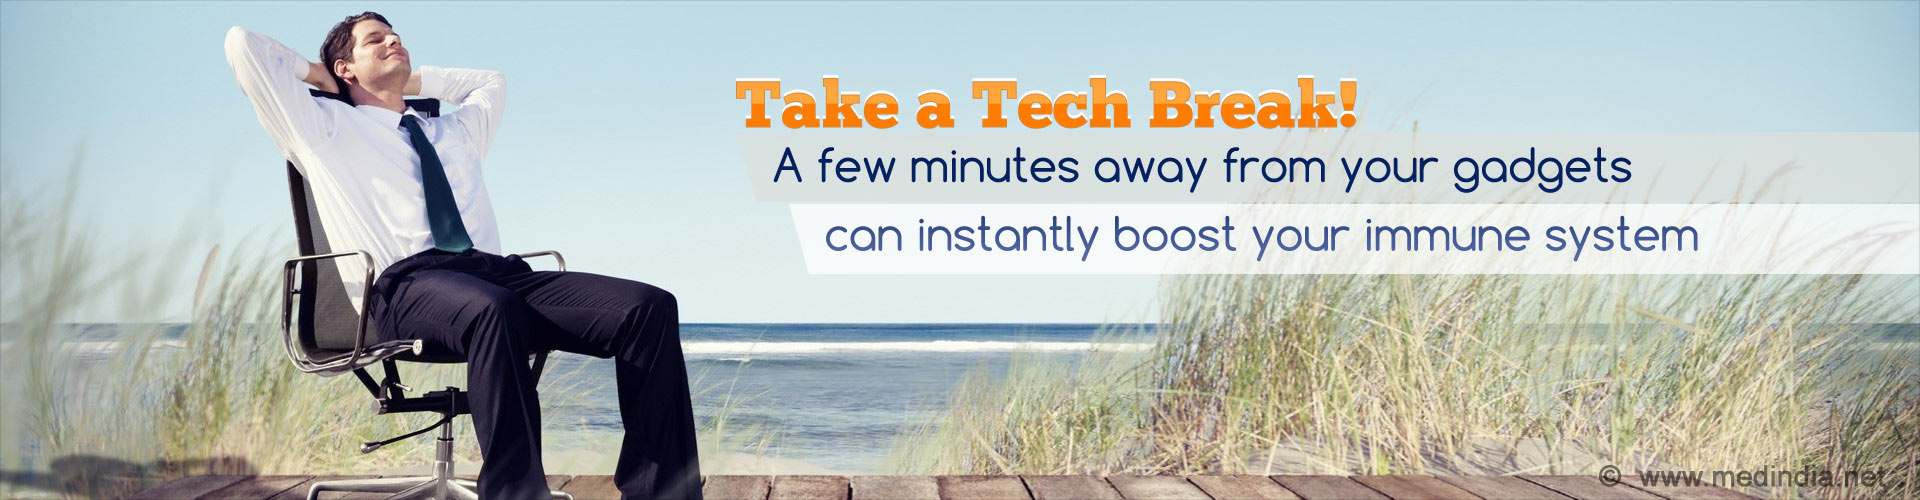 Take a Tech Break! A few minutes away from your gadgets can instantly boost your immune system